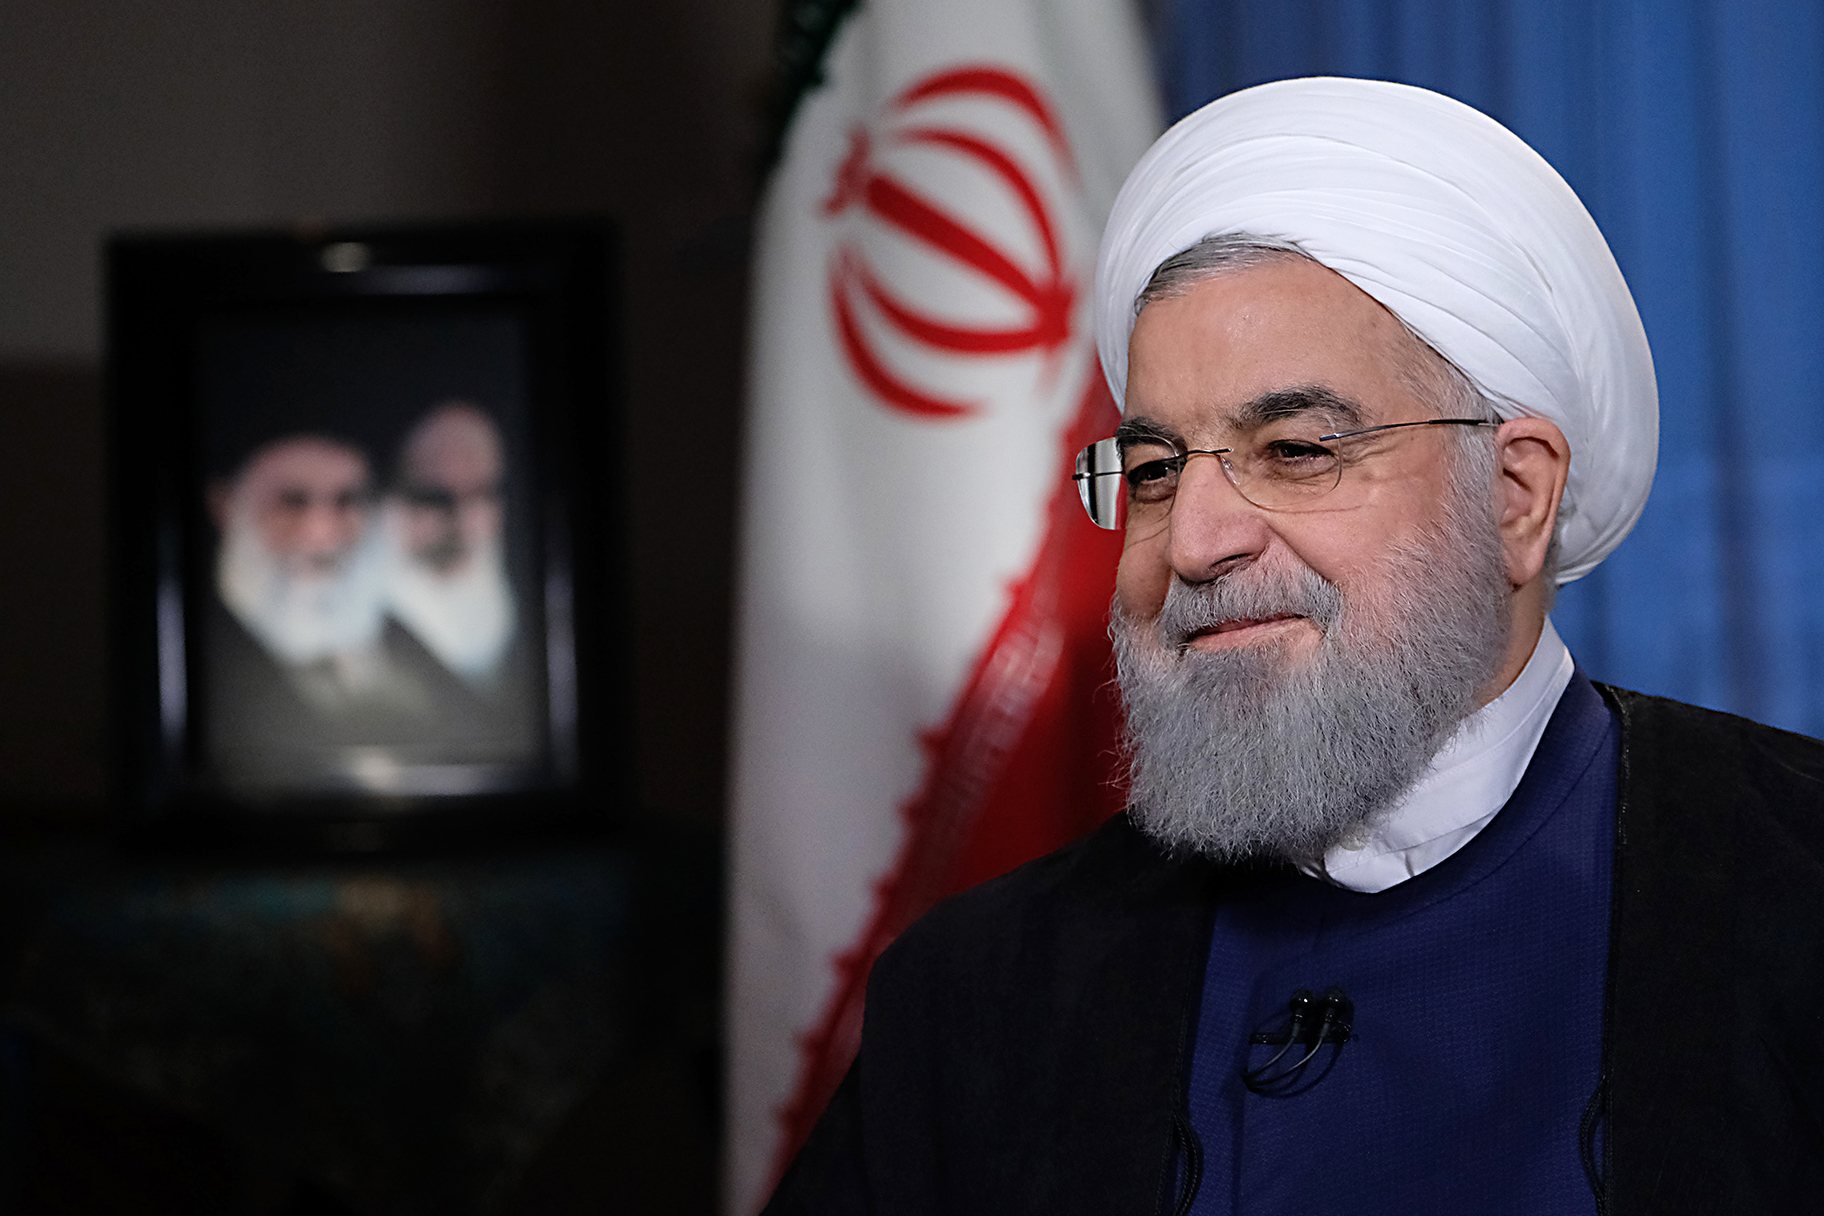 A handout picture provided by the Iranian presidency on August 6, 2018 shows President Hassan Rouhani giving an interview to the Iranian TV in Tehran. President Hassan Rouhani said the US had launched "psychological warfare" against Iran, in a televised speech Monday on the eve of renewed sanctions. "They want to launch psychological warfare against the Iranian nation and create divisions among the people," he said. / AFP PHOTO / Iranian Presidency / - / === RESTRICTED TO EDITORIAL USE - MANDATORY CREDIT "AFP PHOTO / HO / IRANIAN PRESIDENCY" - NO MARKETING NO ADVERTISING CAMPAIGNS - DISTRIBUTED AS A SERVICE TO CLIENTS ===